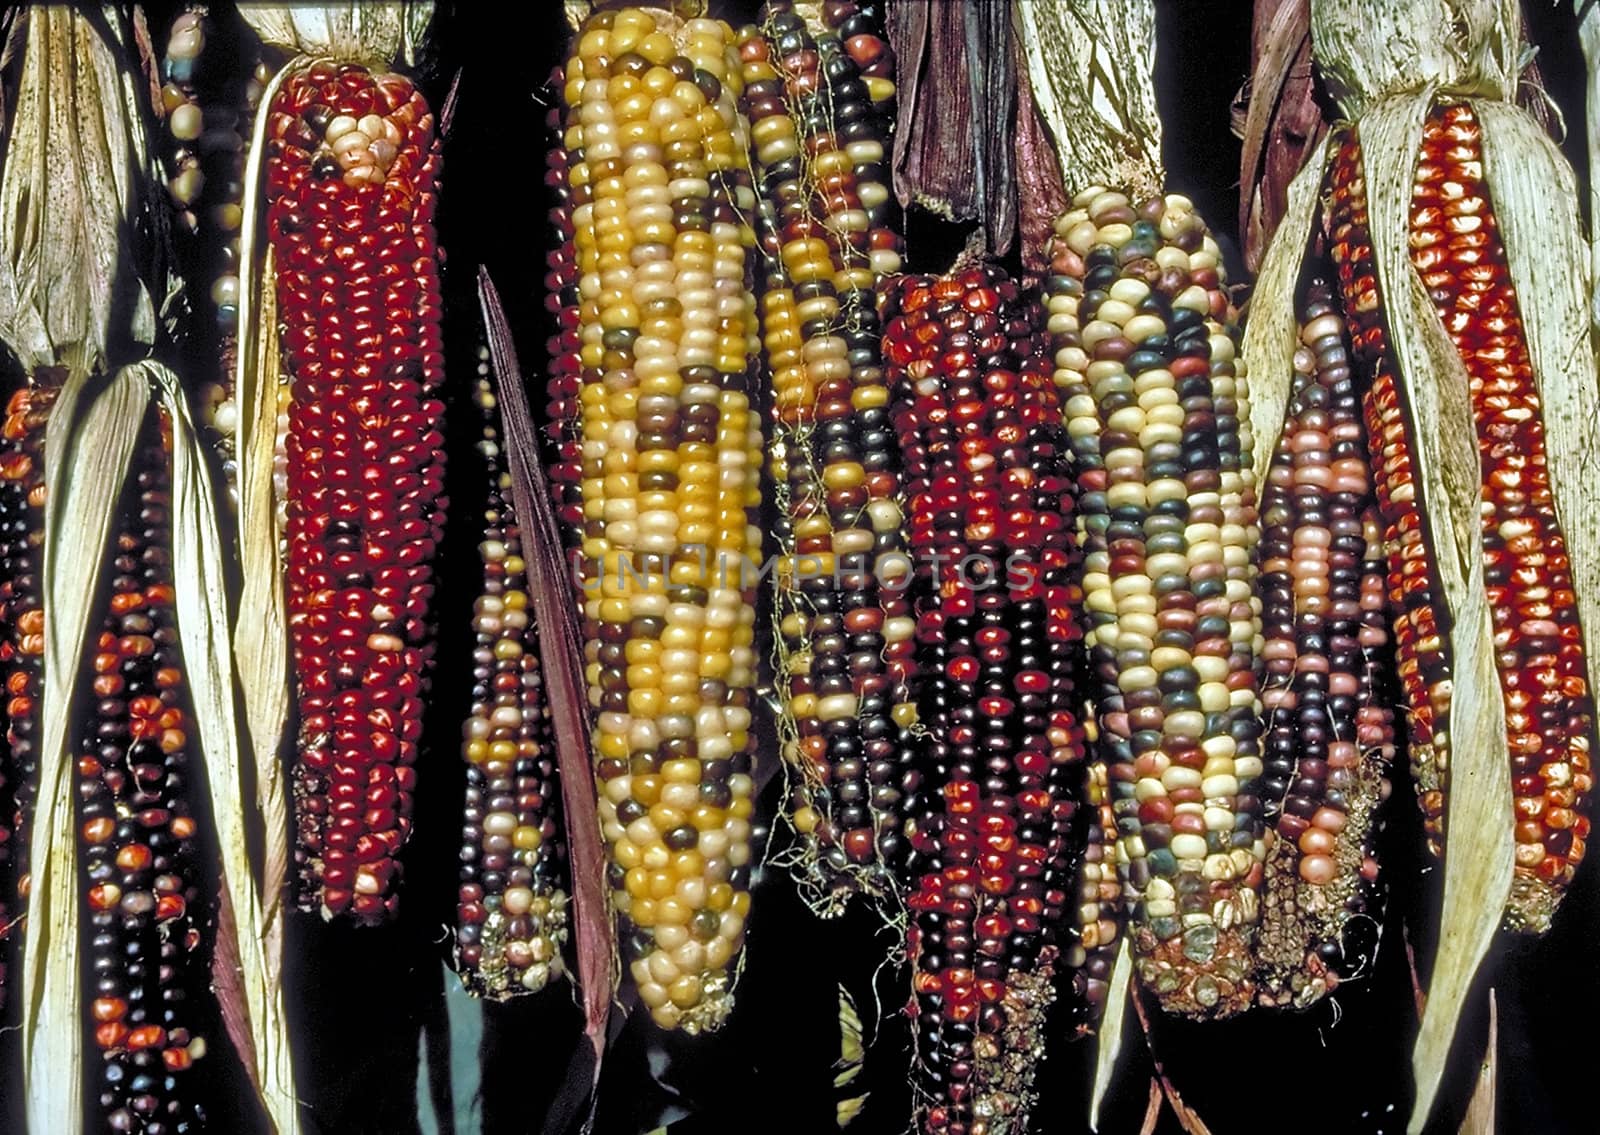 Several ears of colorful Indian Corn cobs hanging in the sun.